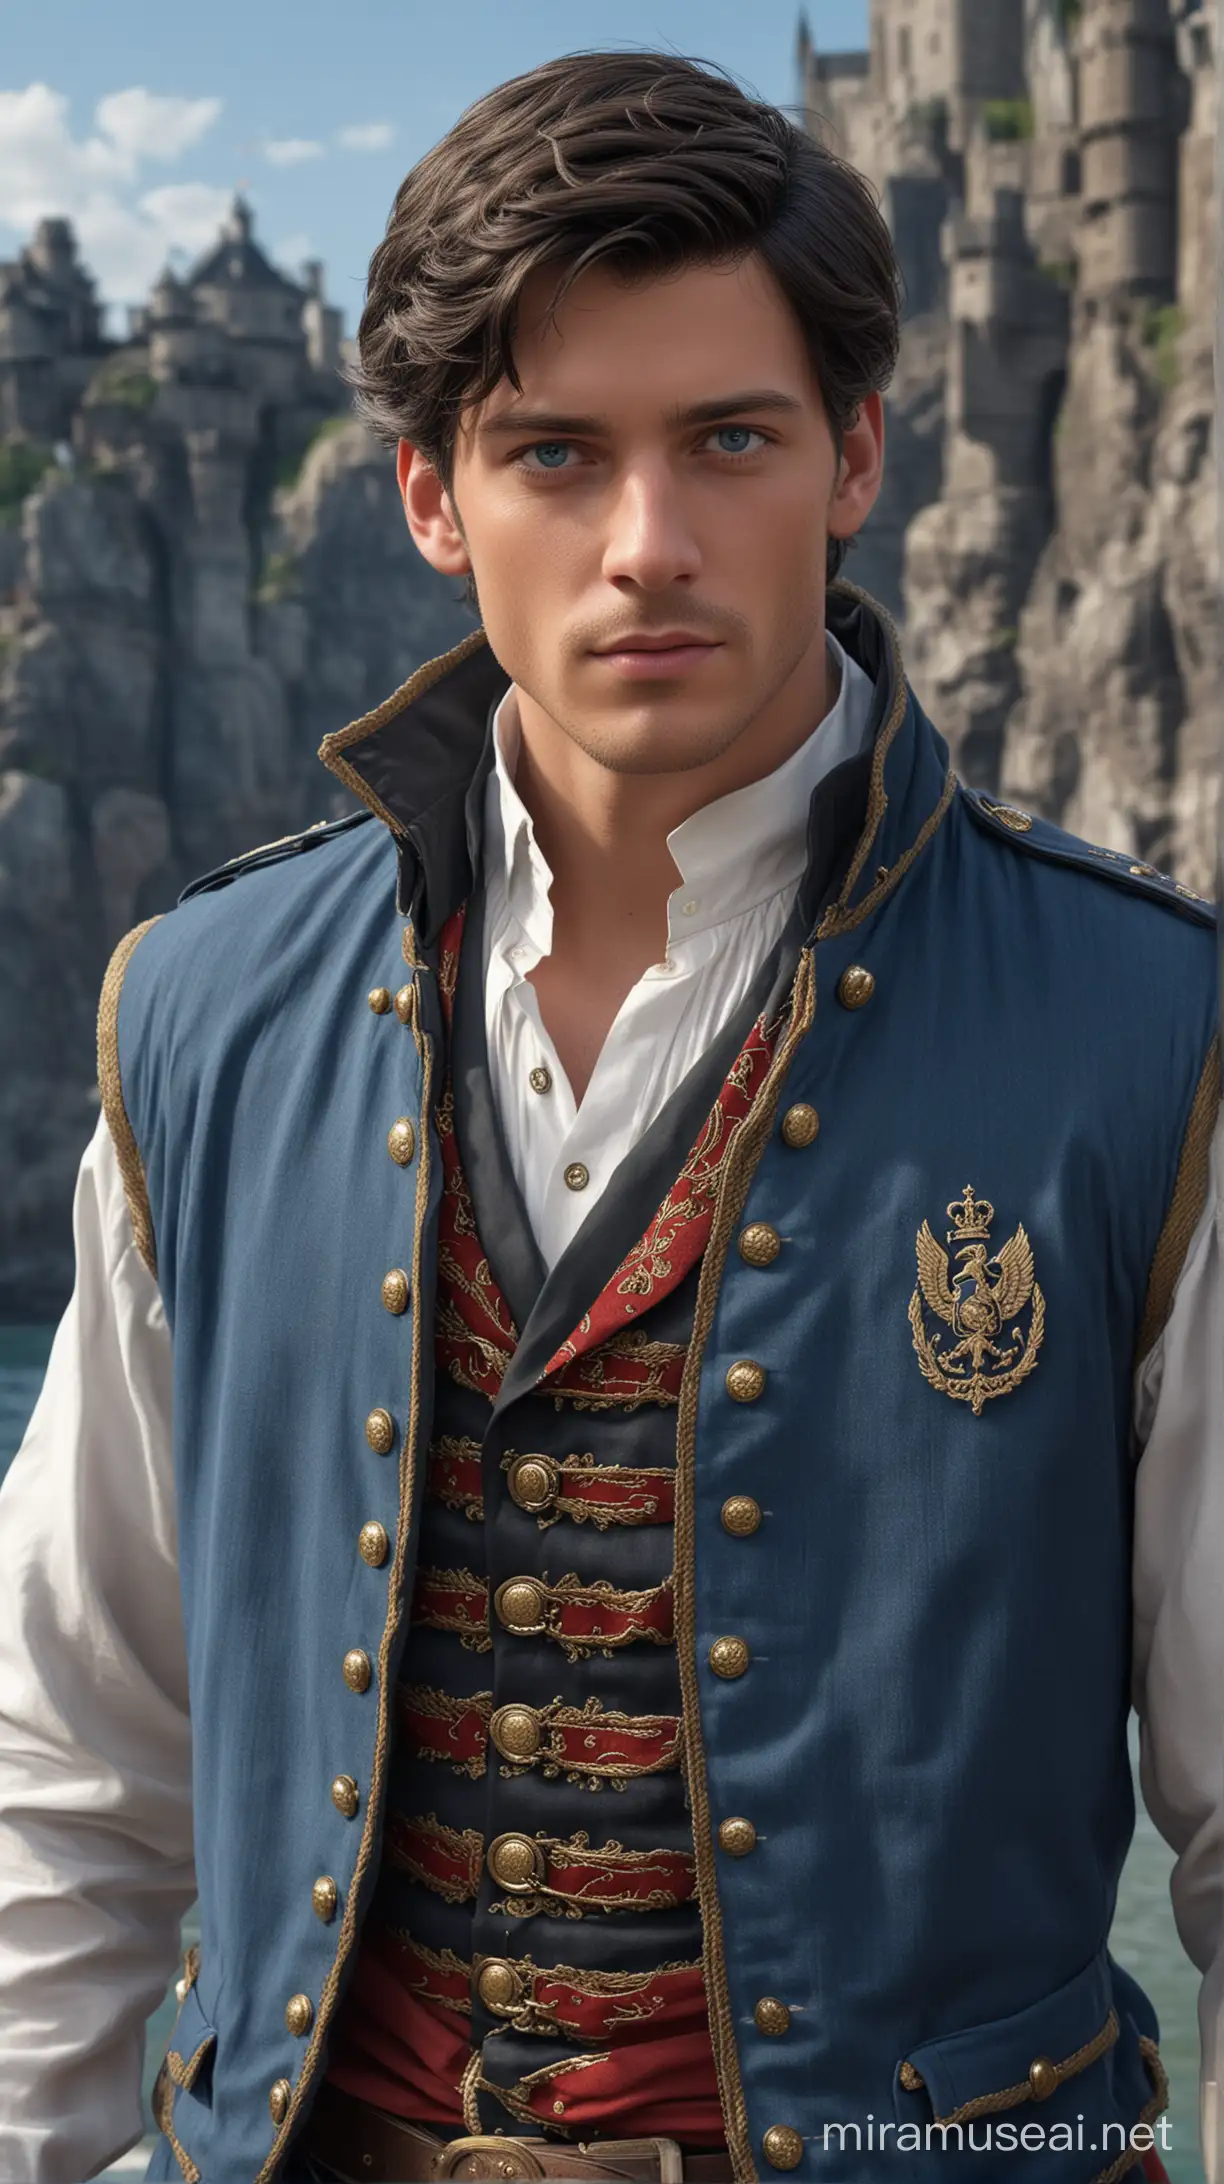 Disney Prince Florian in Military Garb Amidst Natural Beauty